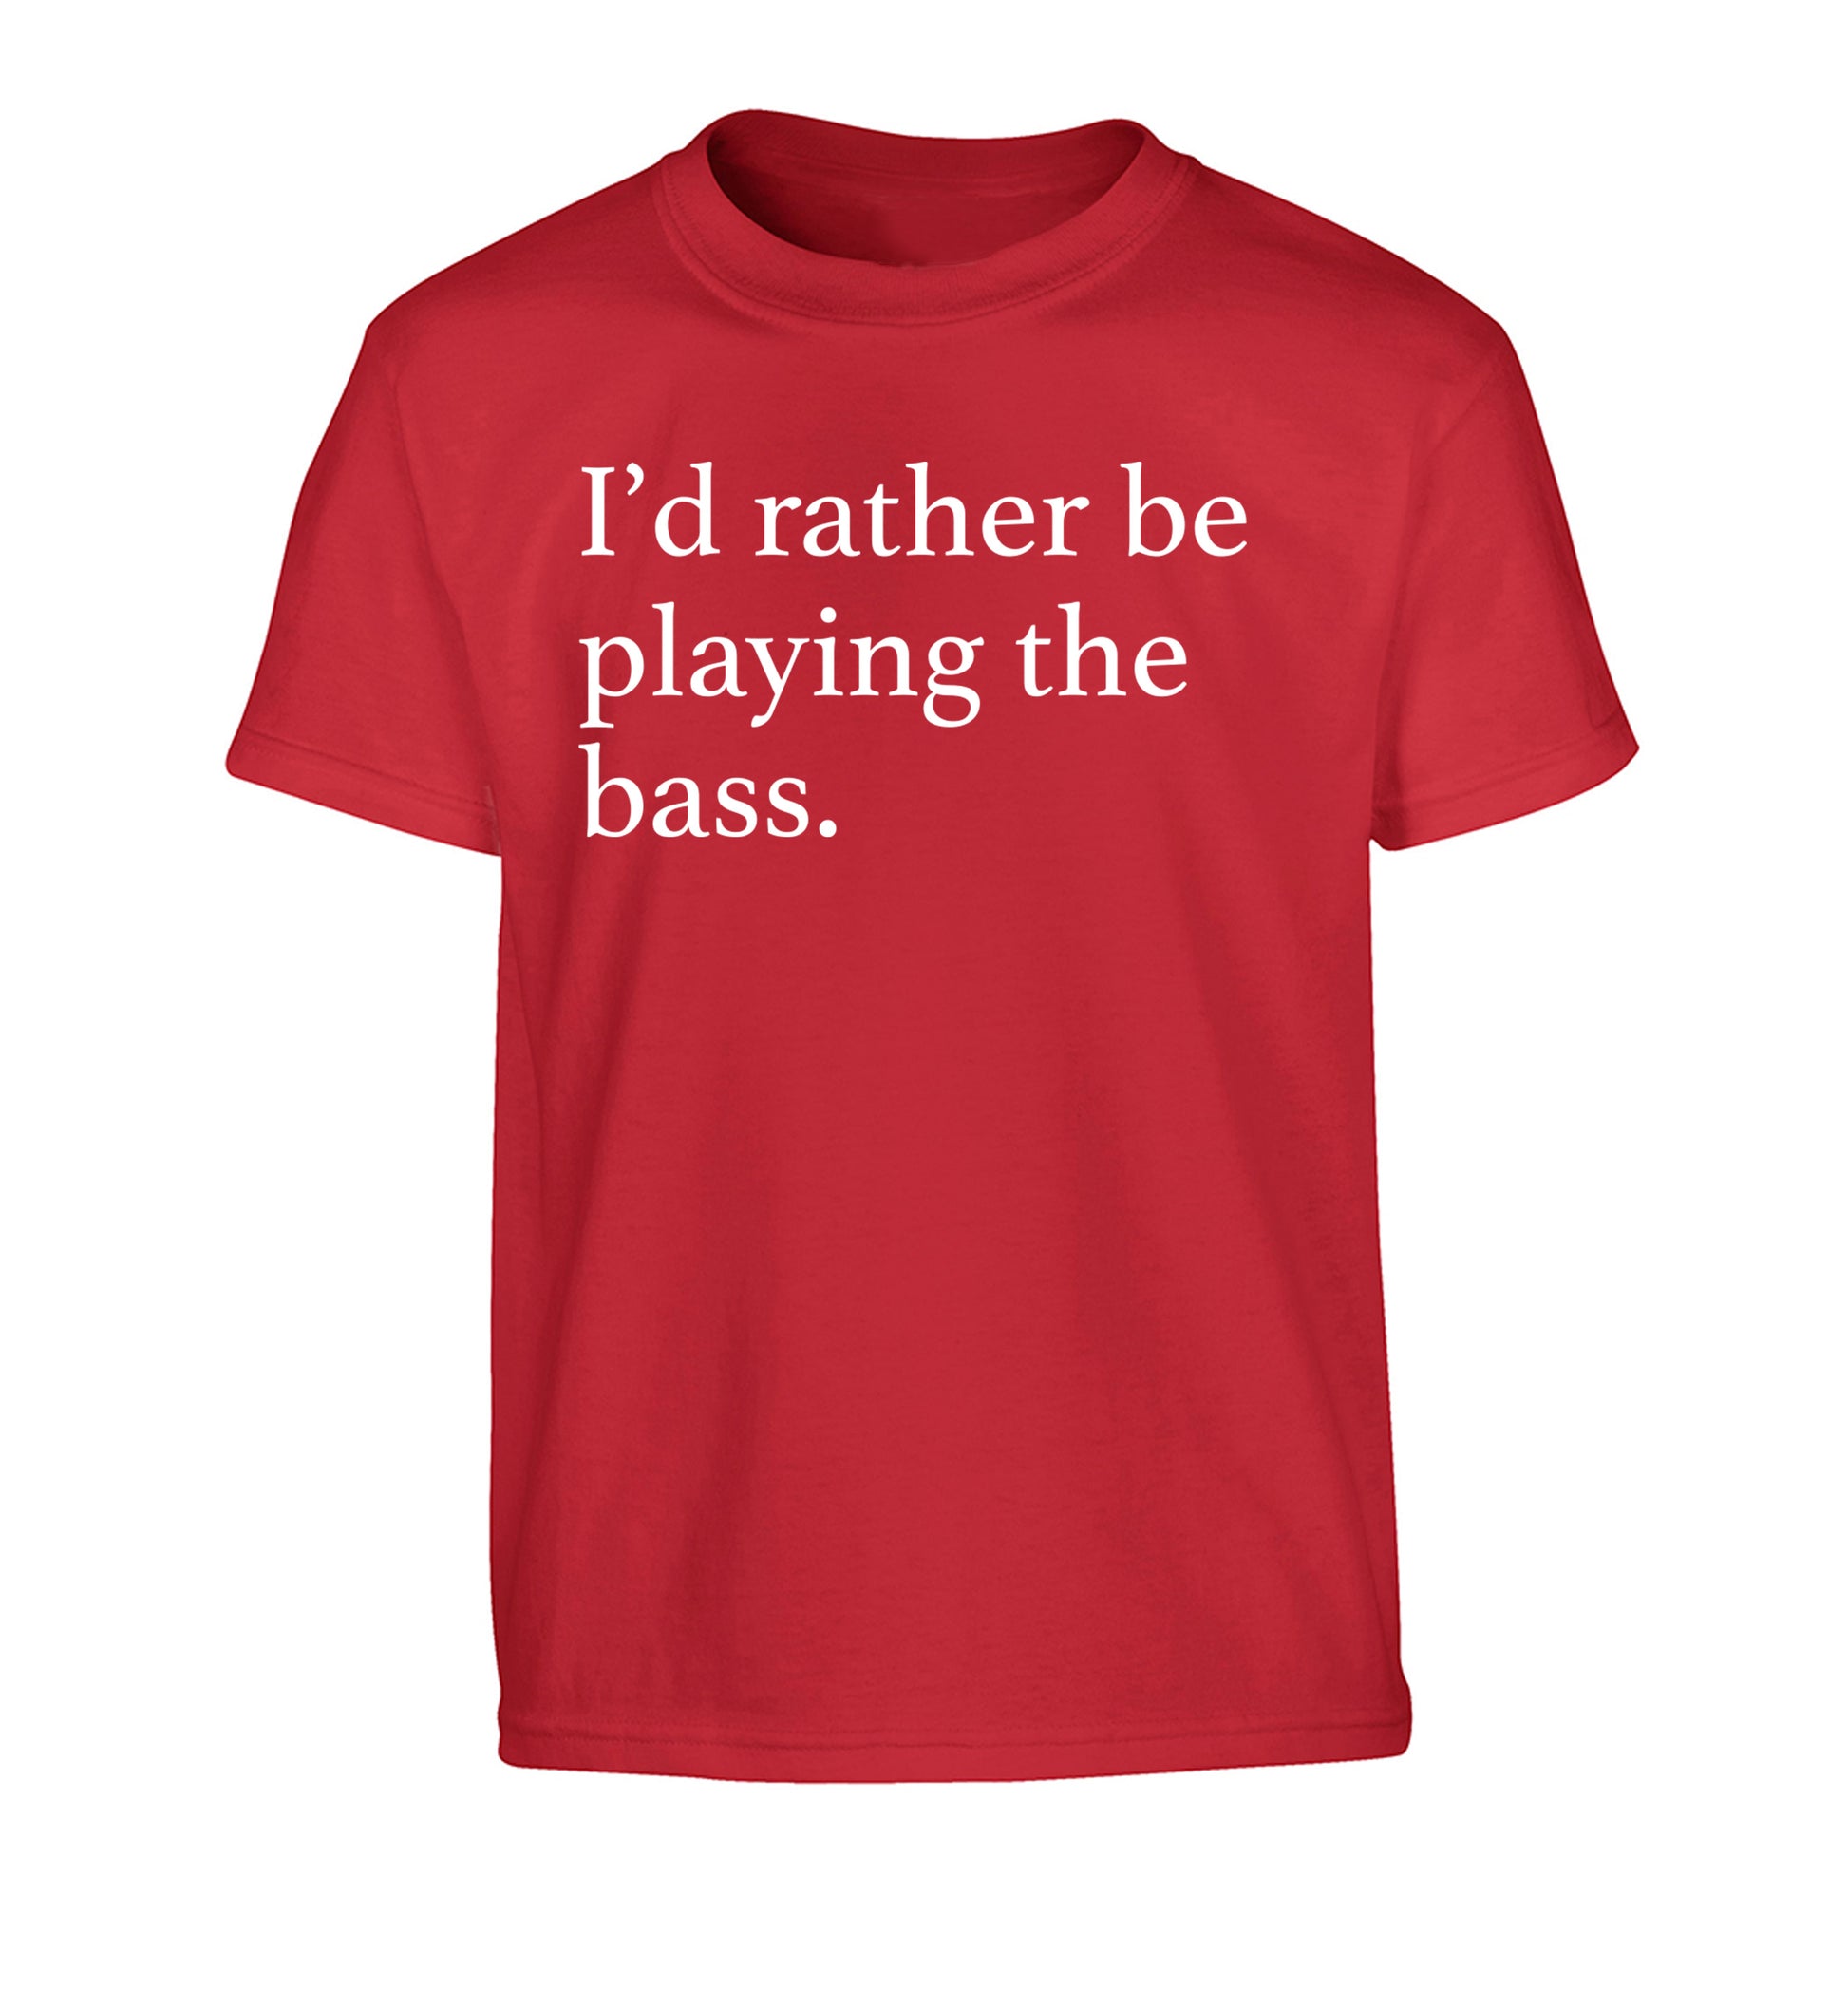 I'd rather by playing the bass Children's red Tshirt 12-14 Years